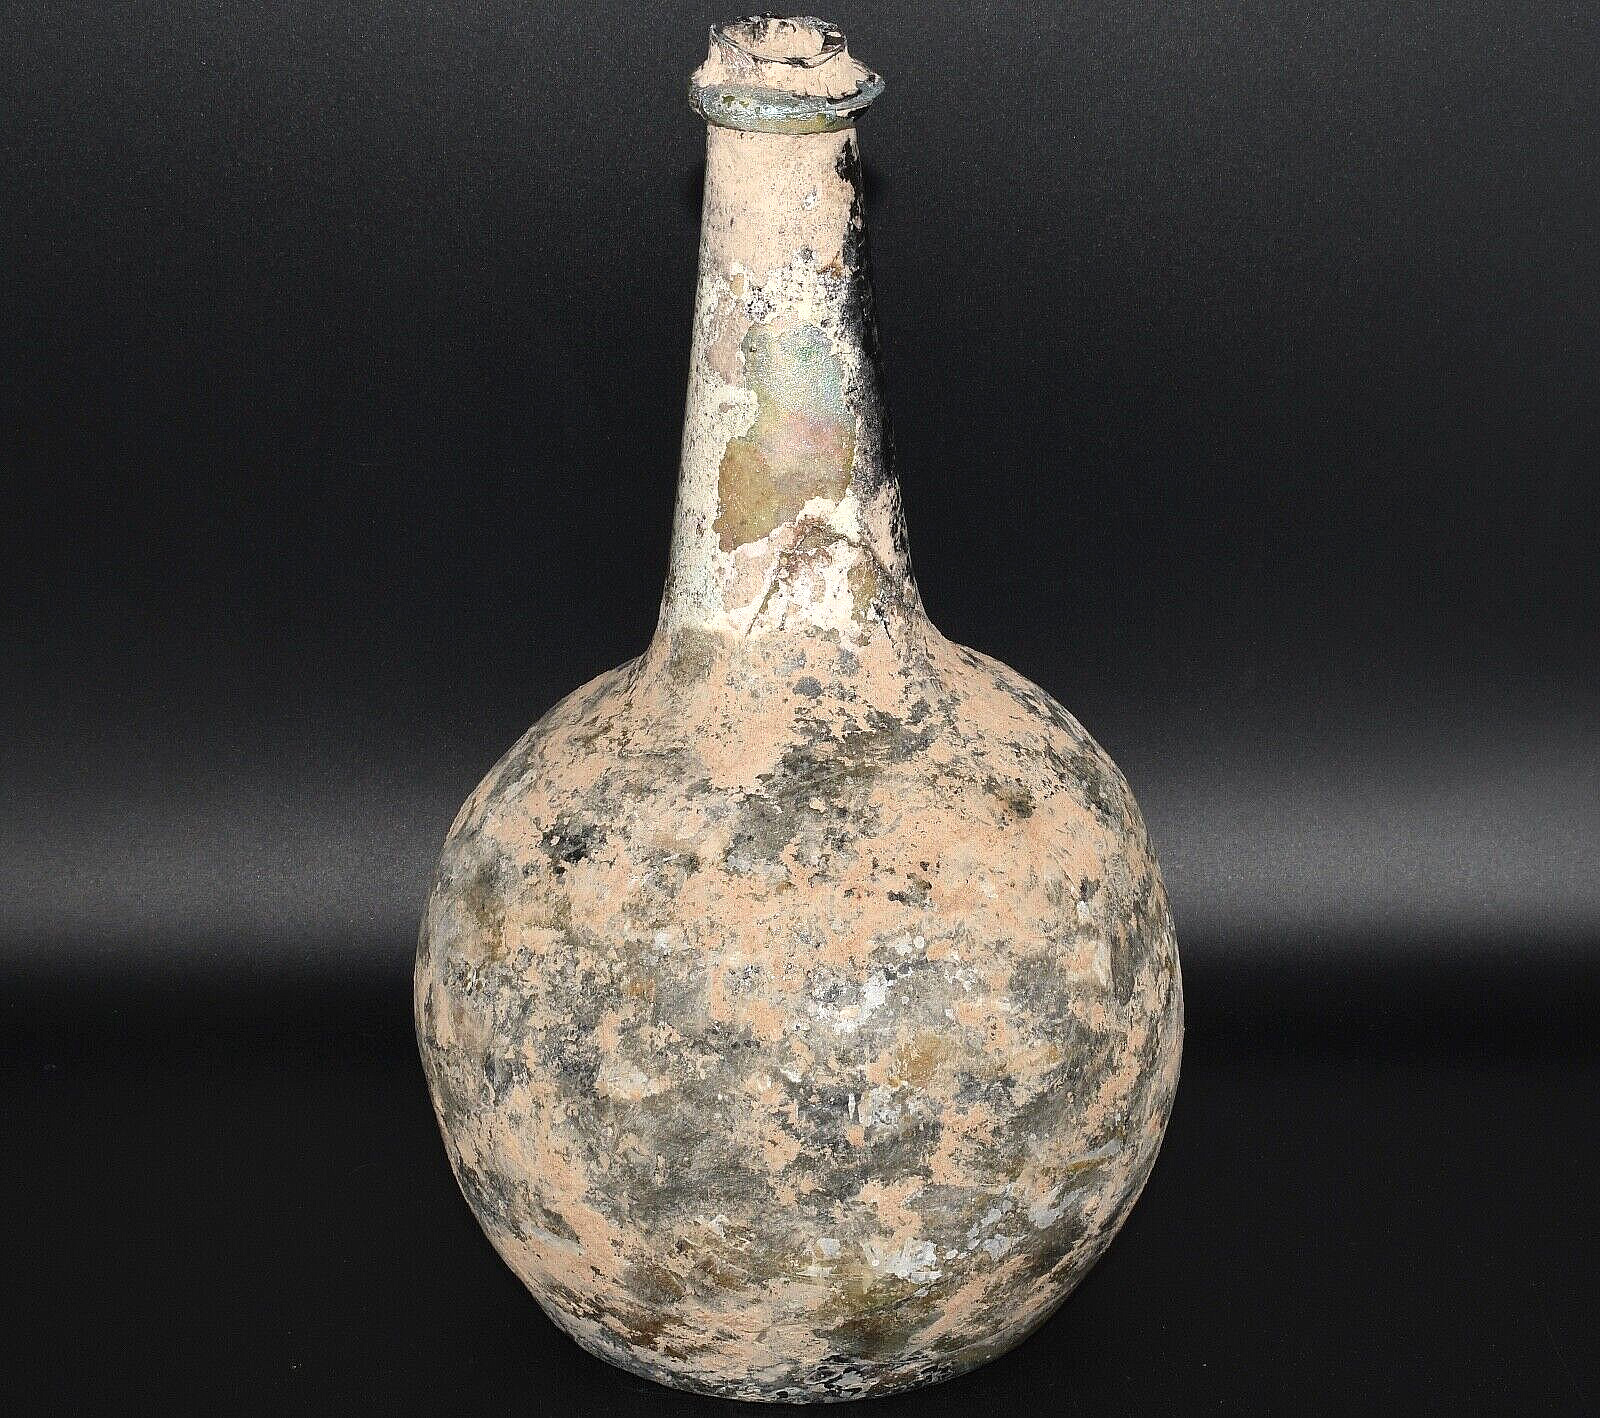 Big Ancient Roman Glass Bottle Vase in Good Condition with Yellow Patina